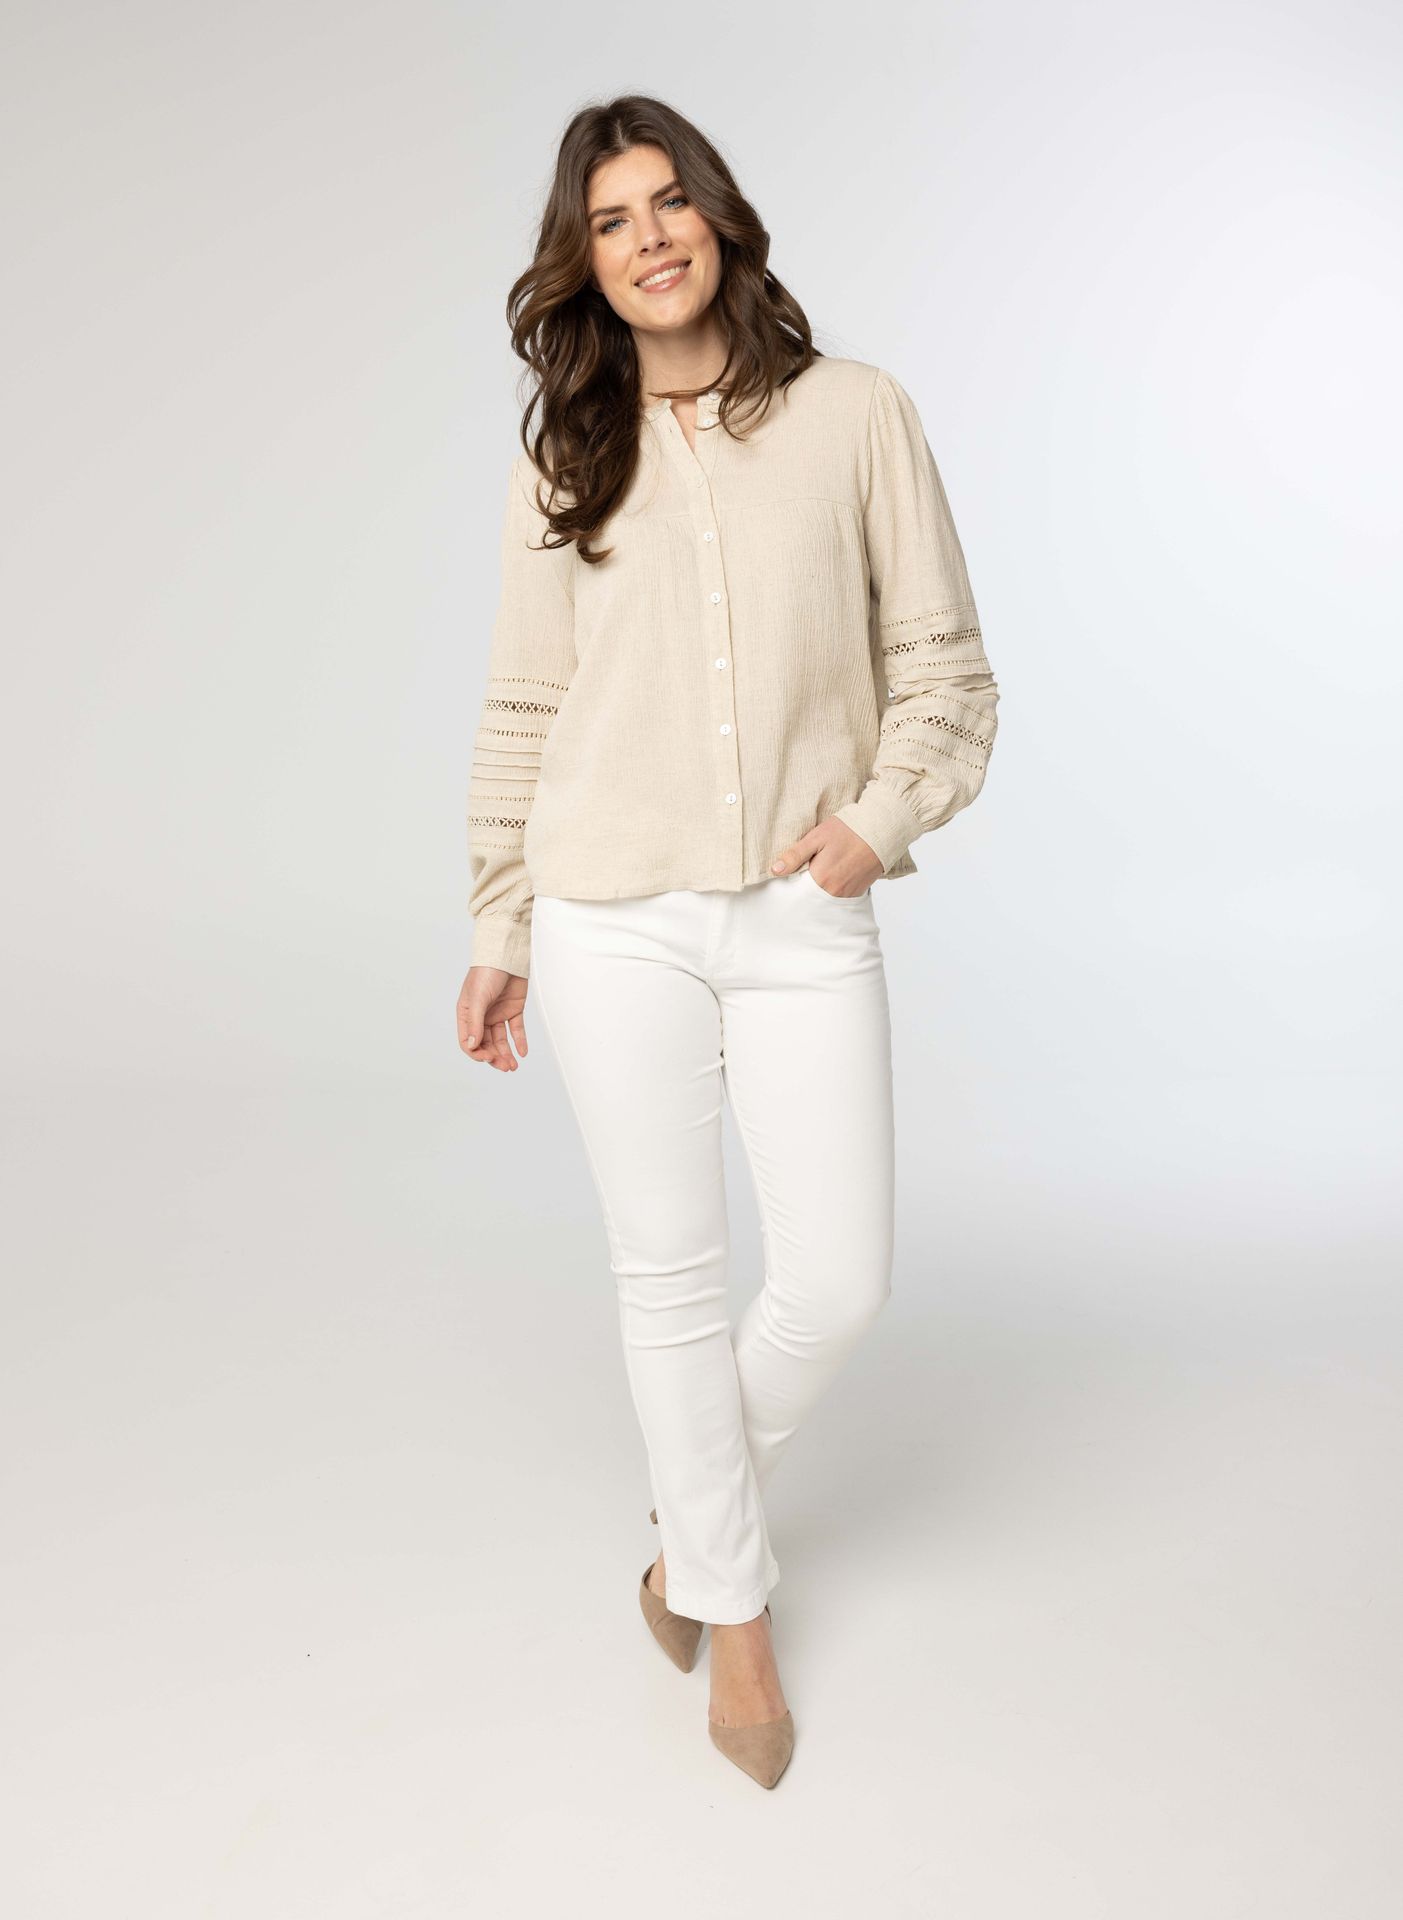 Norah Witte flared jeans white 212358-100-36